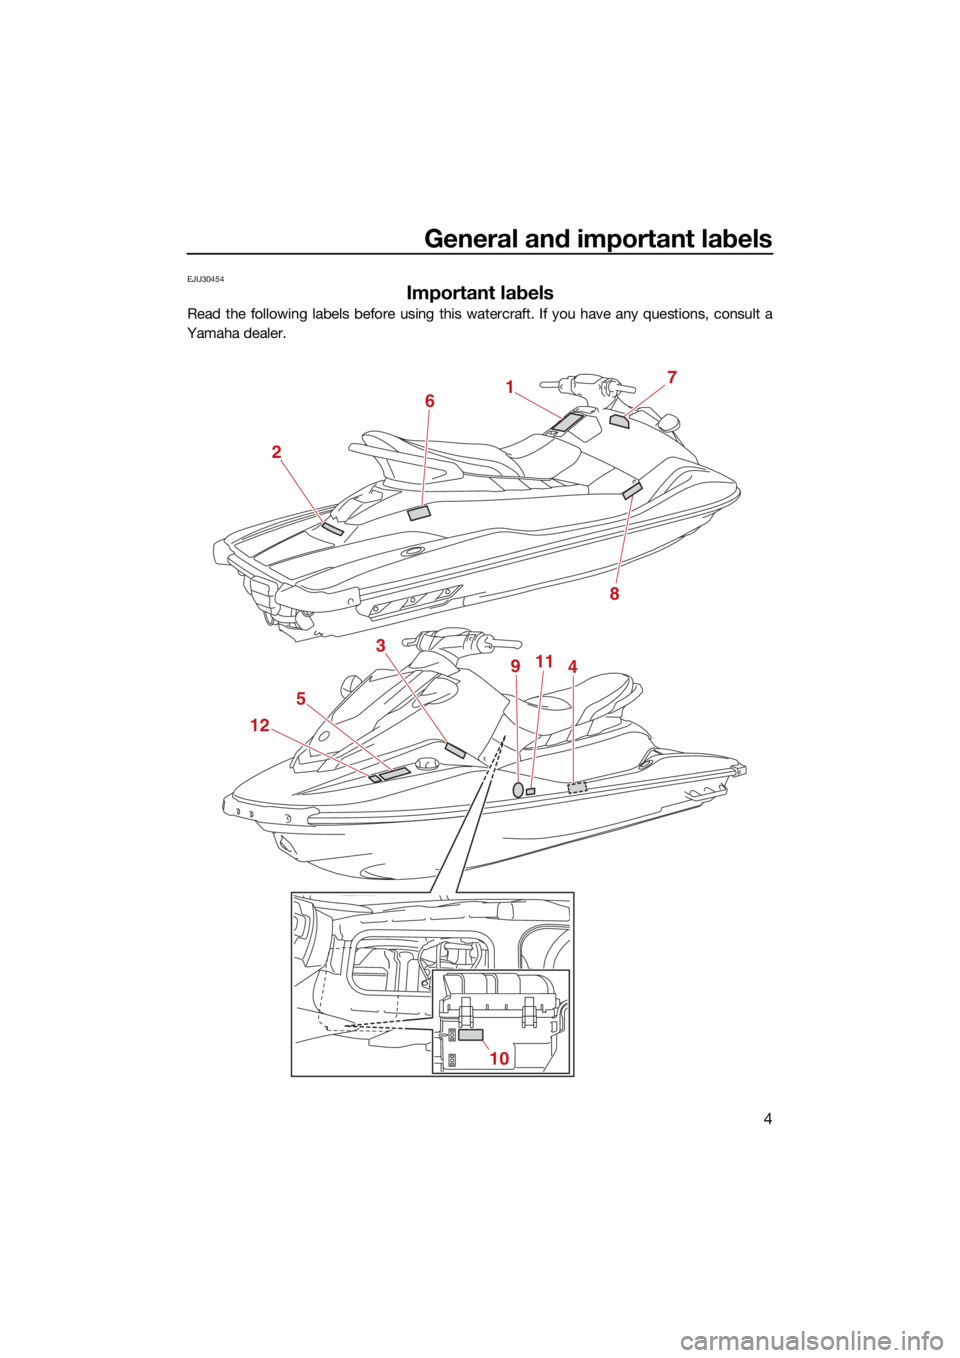 YAMAHA EX DELUXE 2021 User Guide General and important labels
4
EJU30454
Important labels
Read the following labels before using this watercraft. If you have any questions, consult a
Yamaha dealer.
17
8
2
6
5
12 3
9
114
10
UF3Y74E0.b